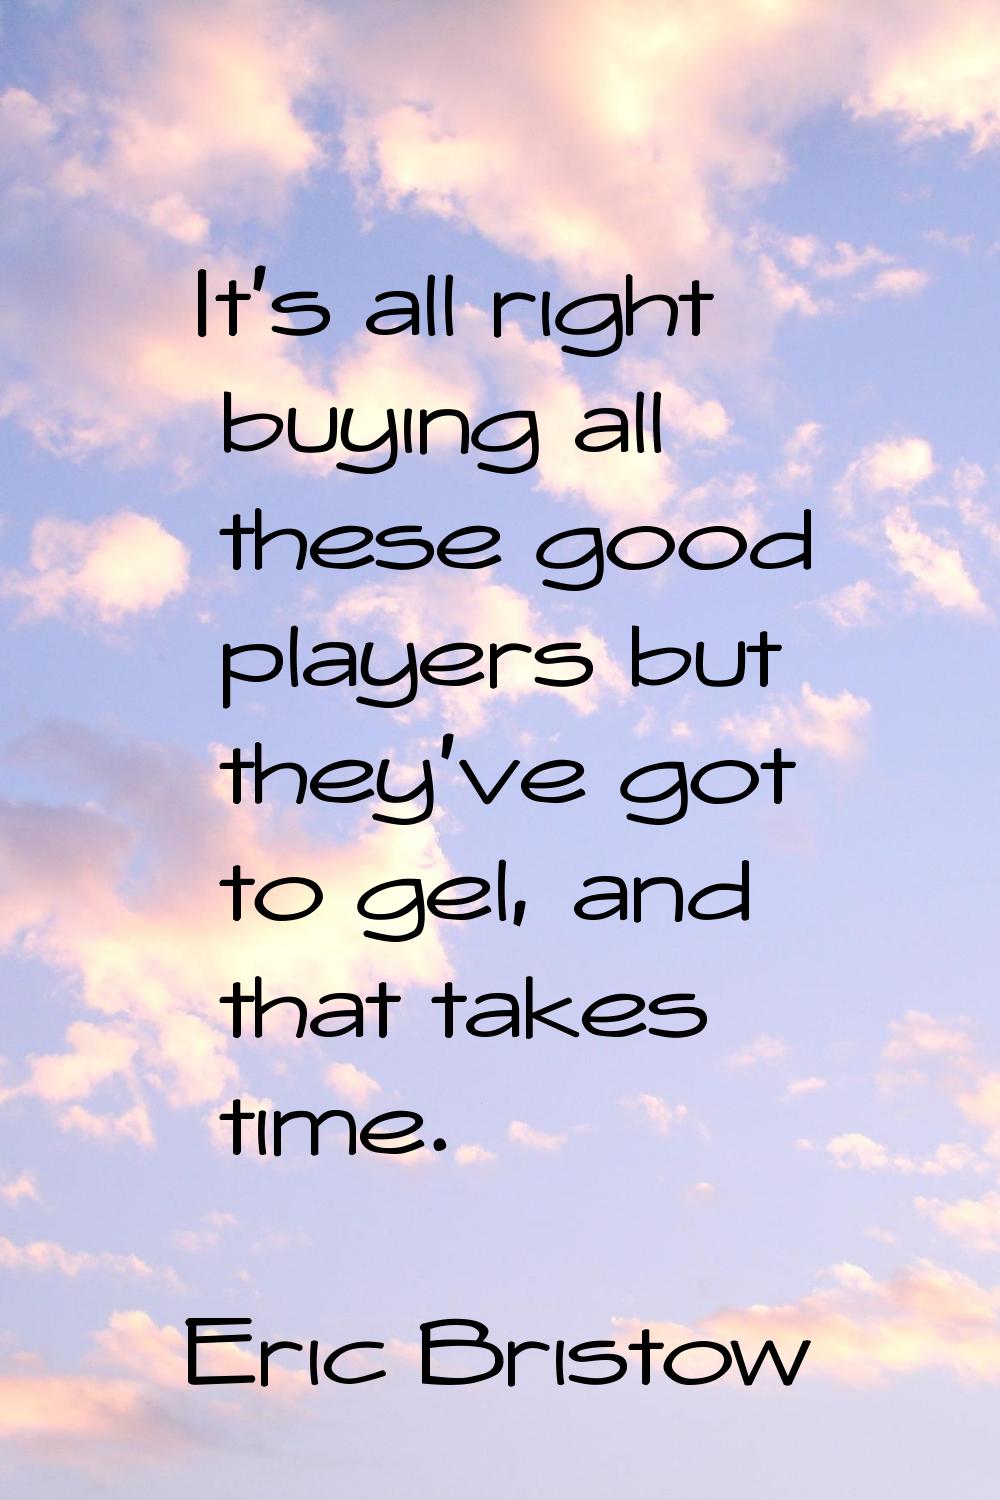 It's all right buying all these good players but they've got to gel, and that takes time.